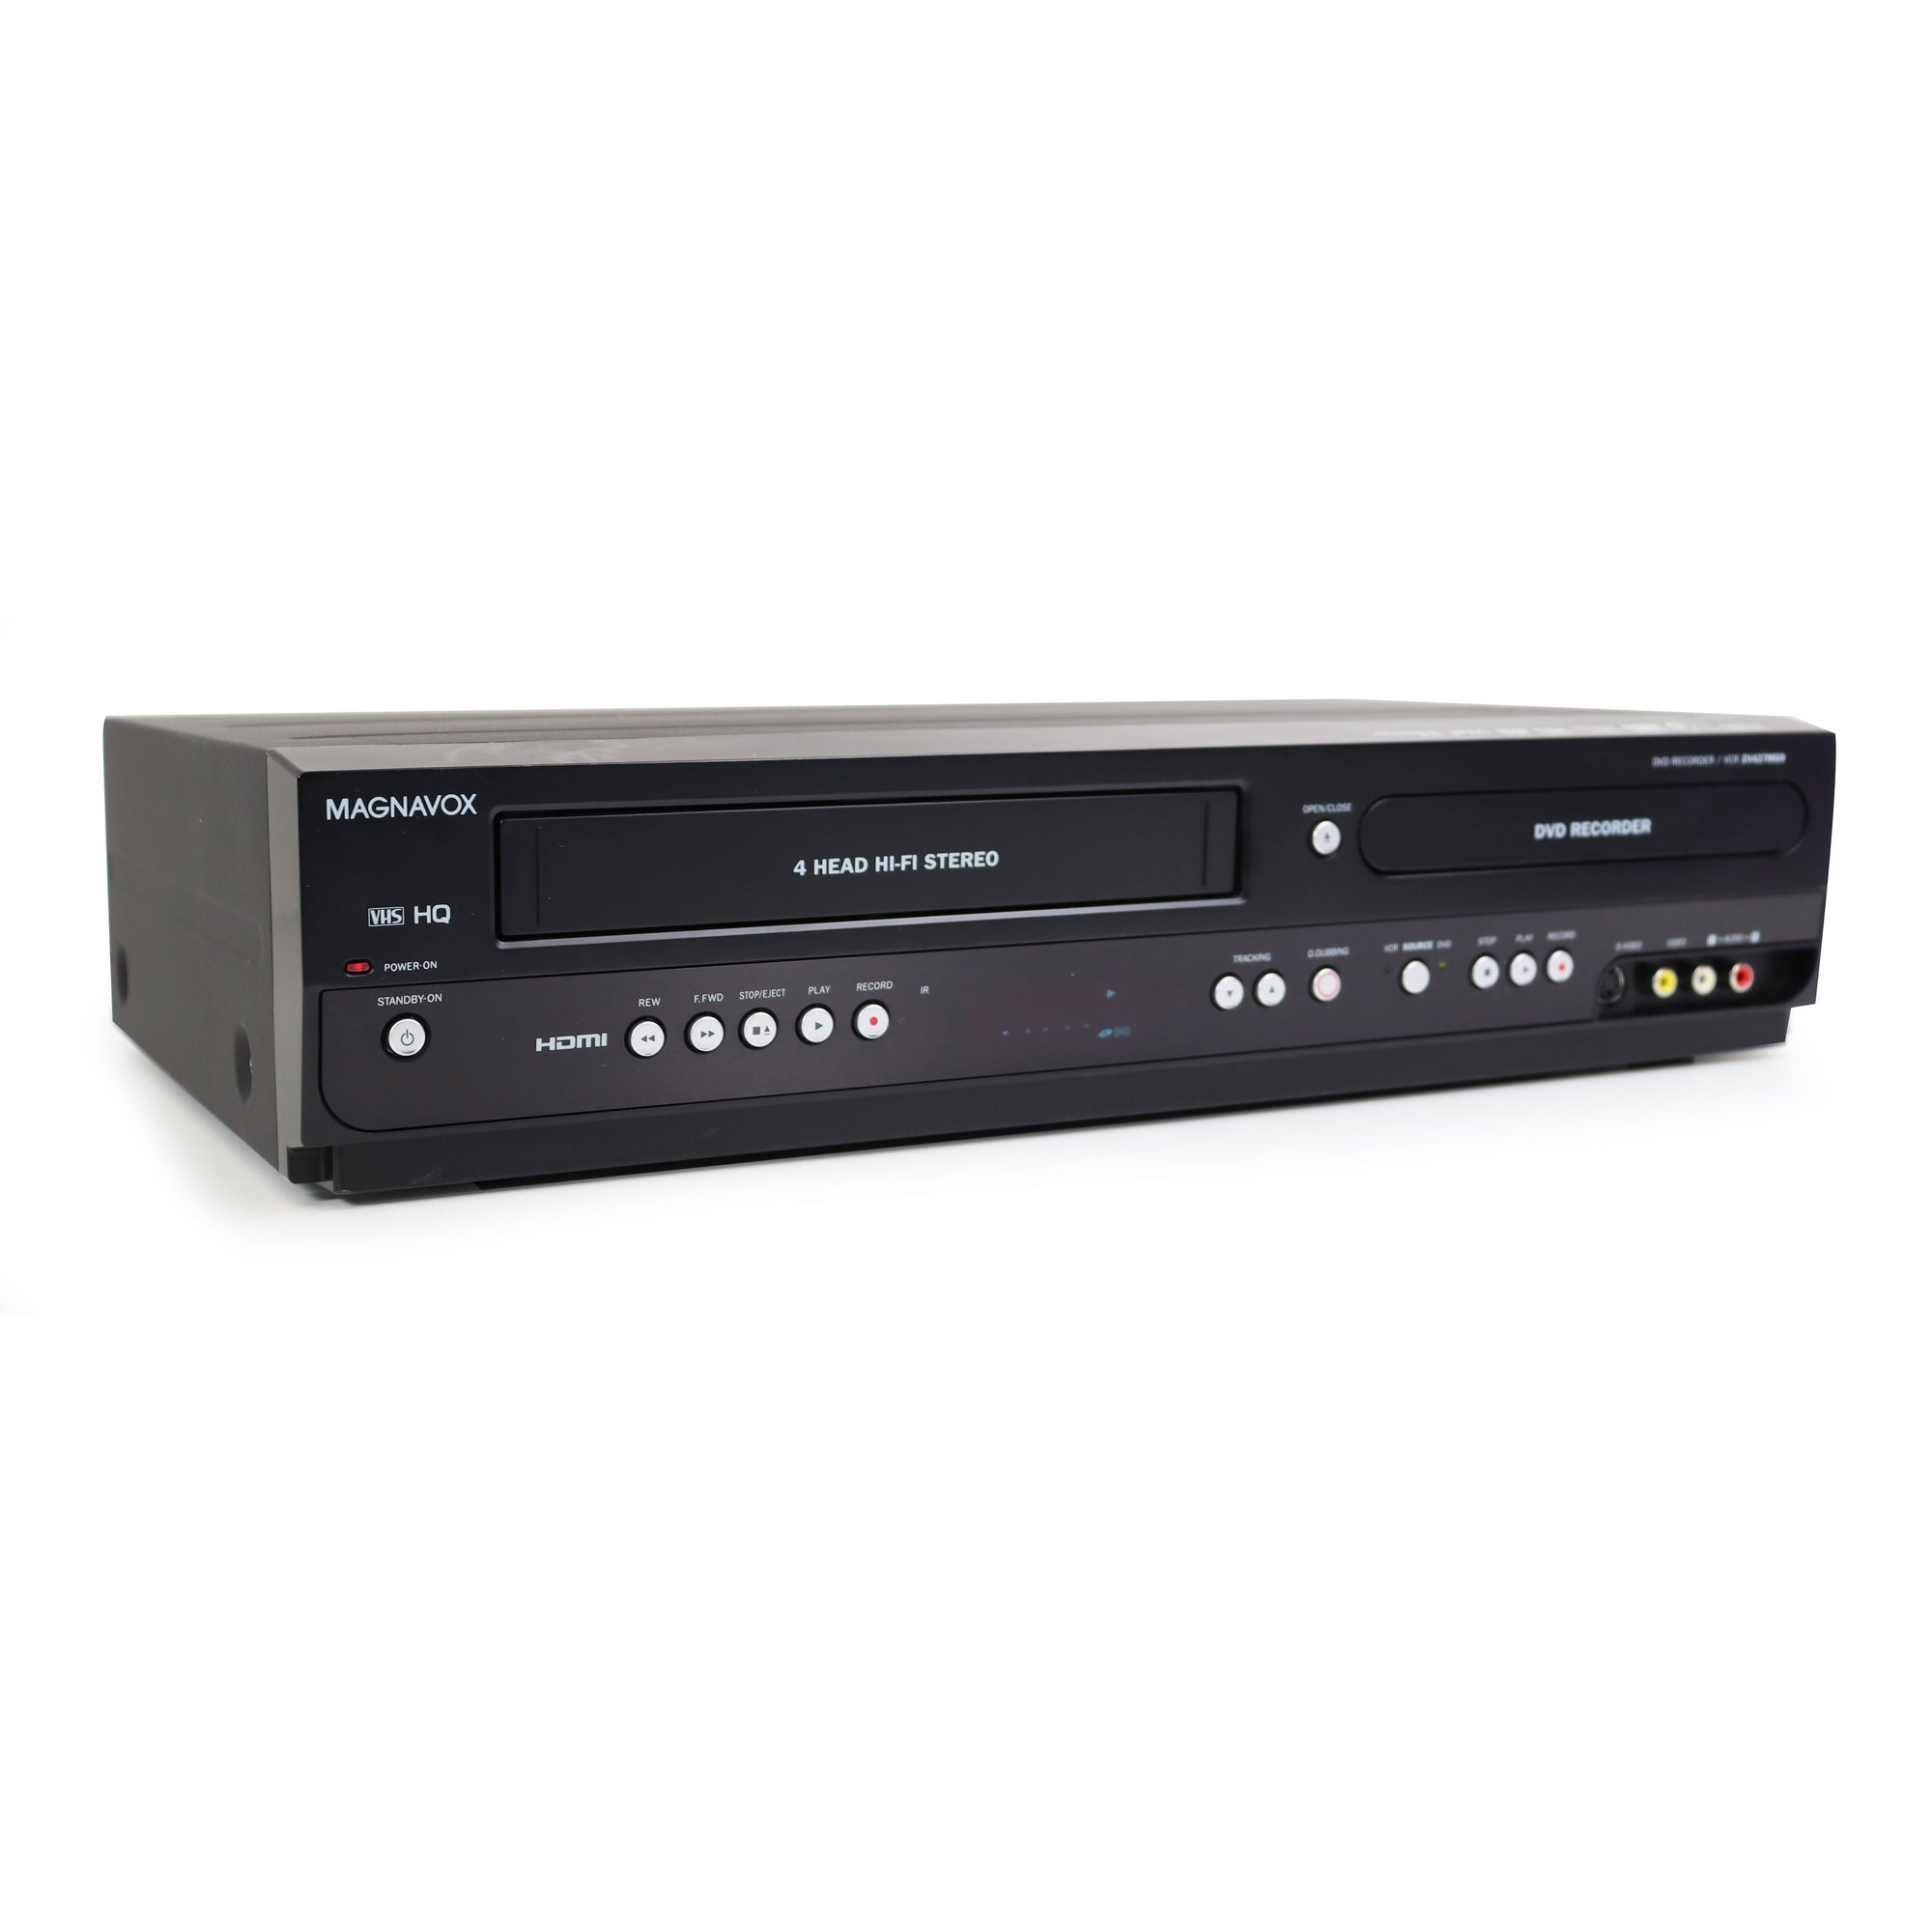 Magnavox DVD VCR VHS Combo Recorder with 1080p HDMI Upconversion. VHS to DVD 2 way dubbing tape conversion